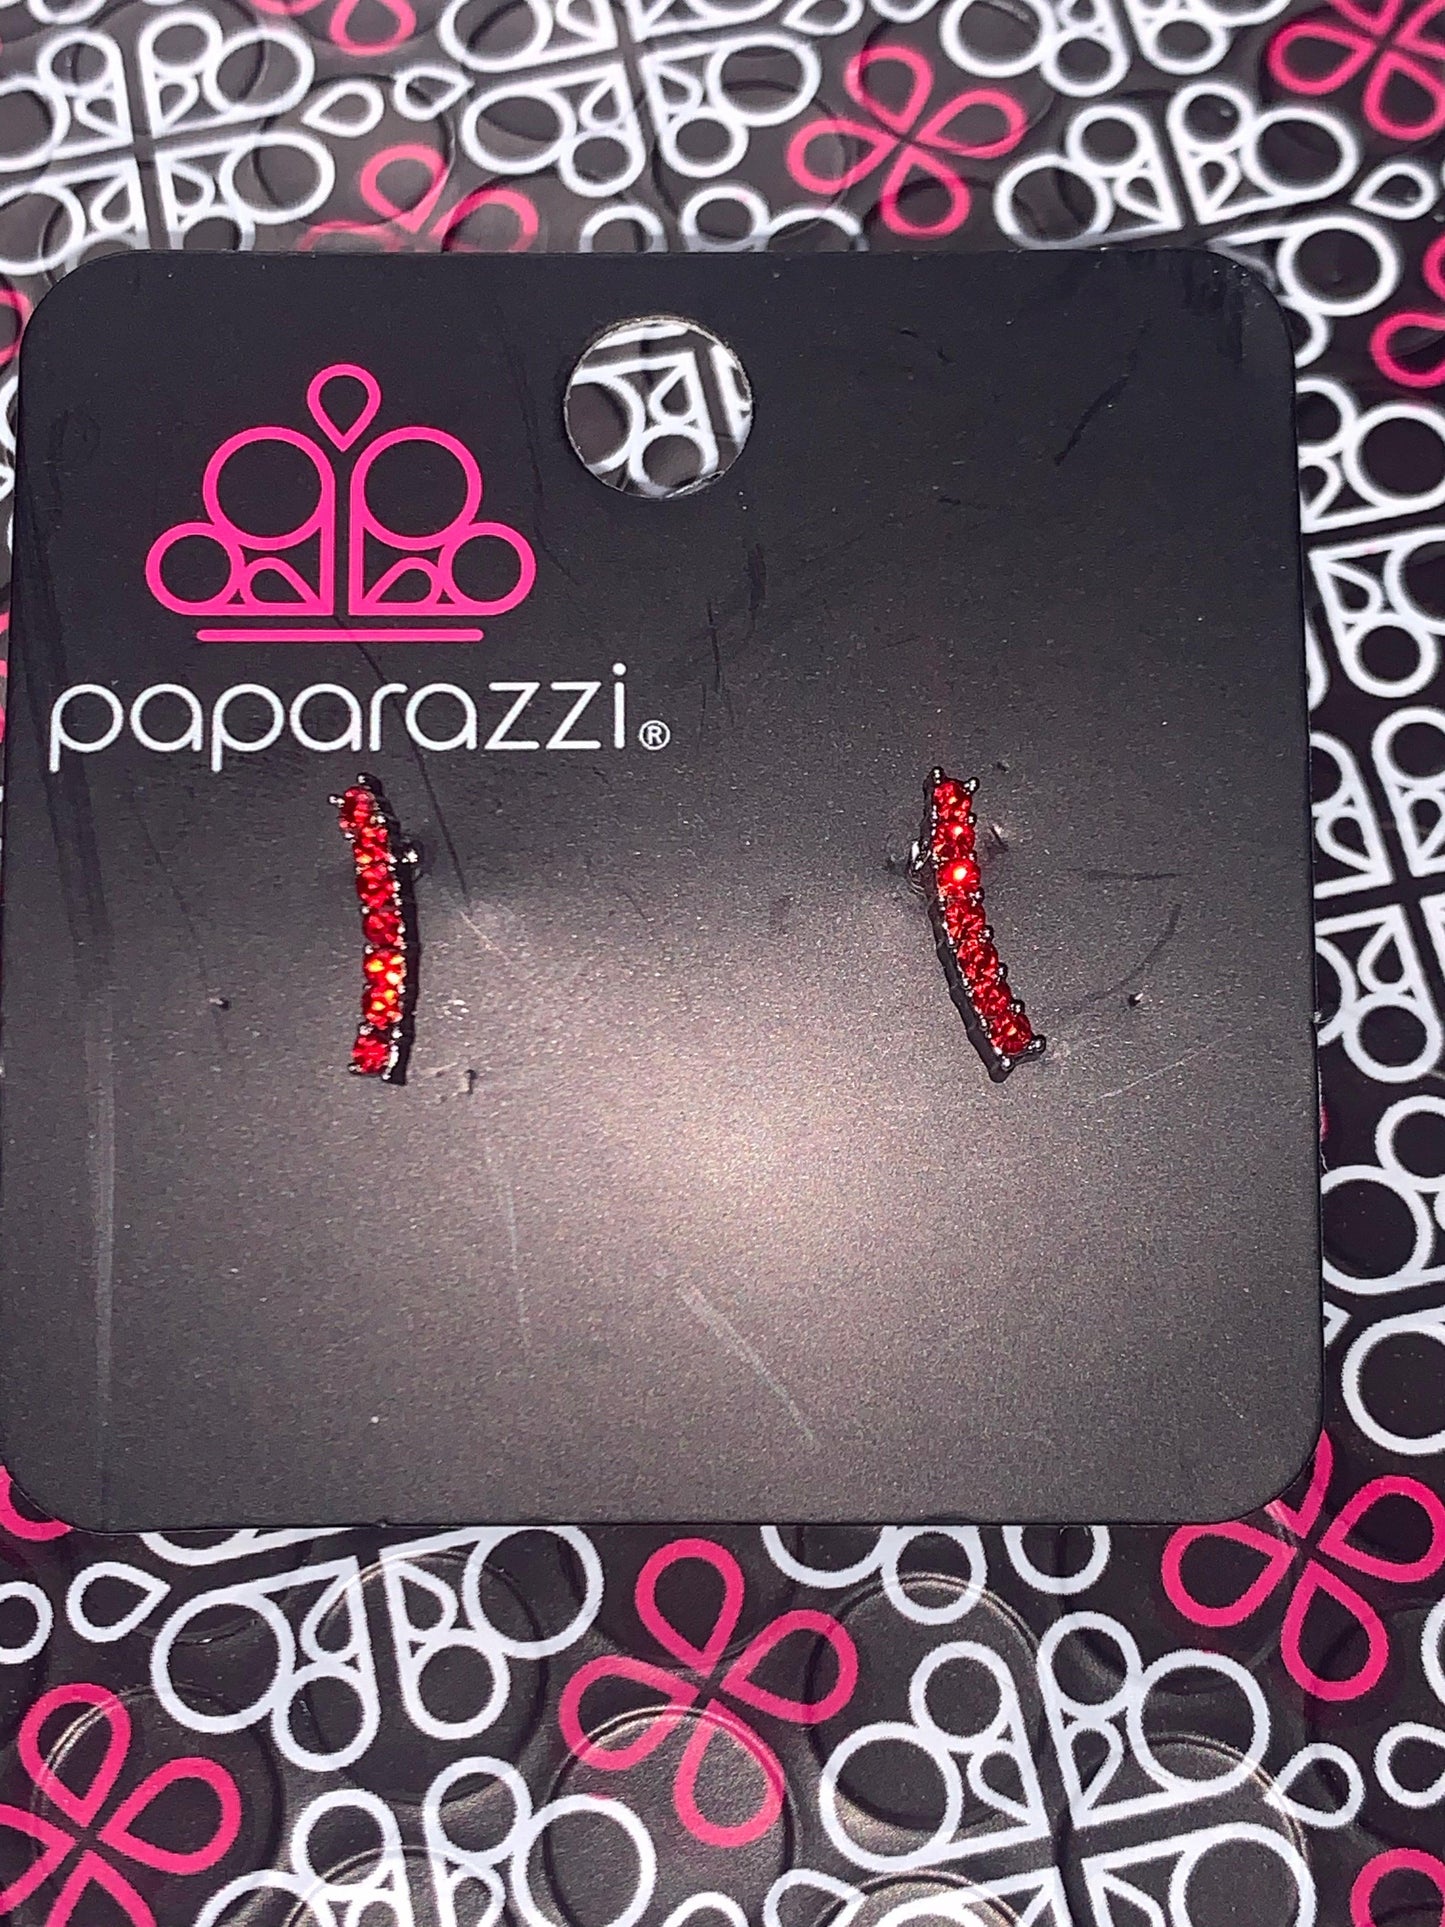 Paparazzi Accessories Starlet Shimmer Earrings: #5 - Red Jewelry